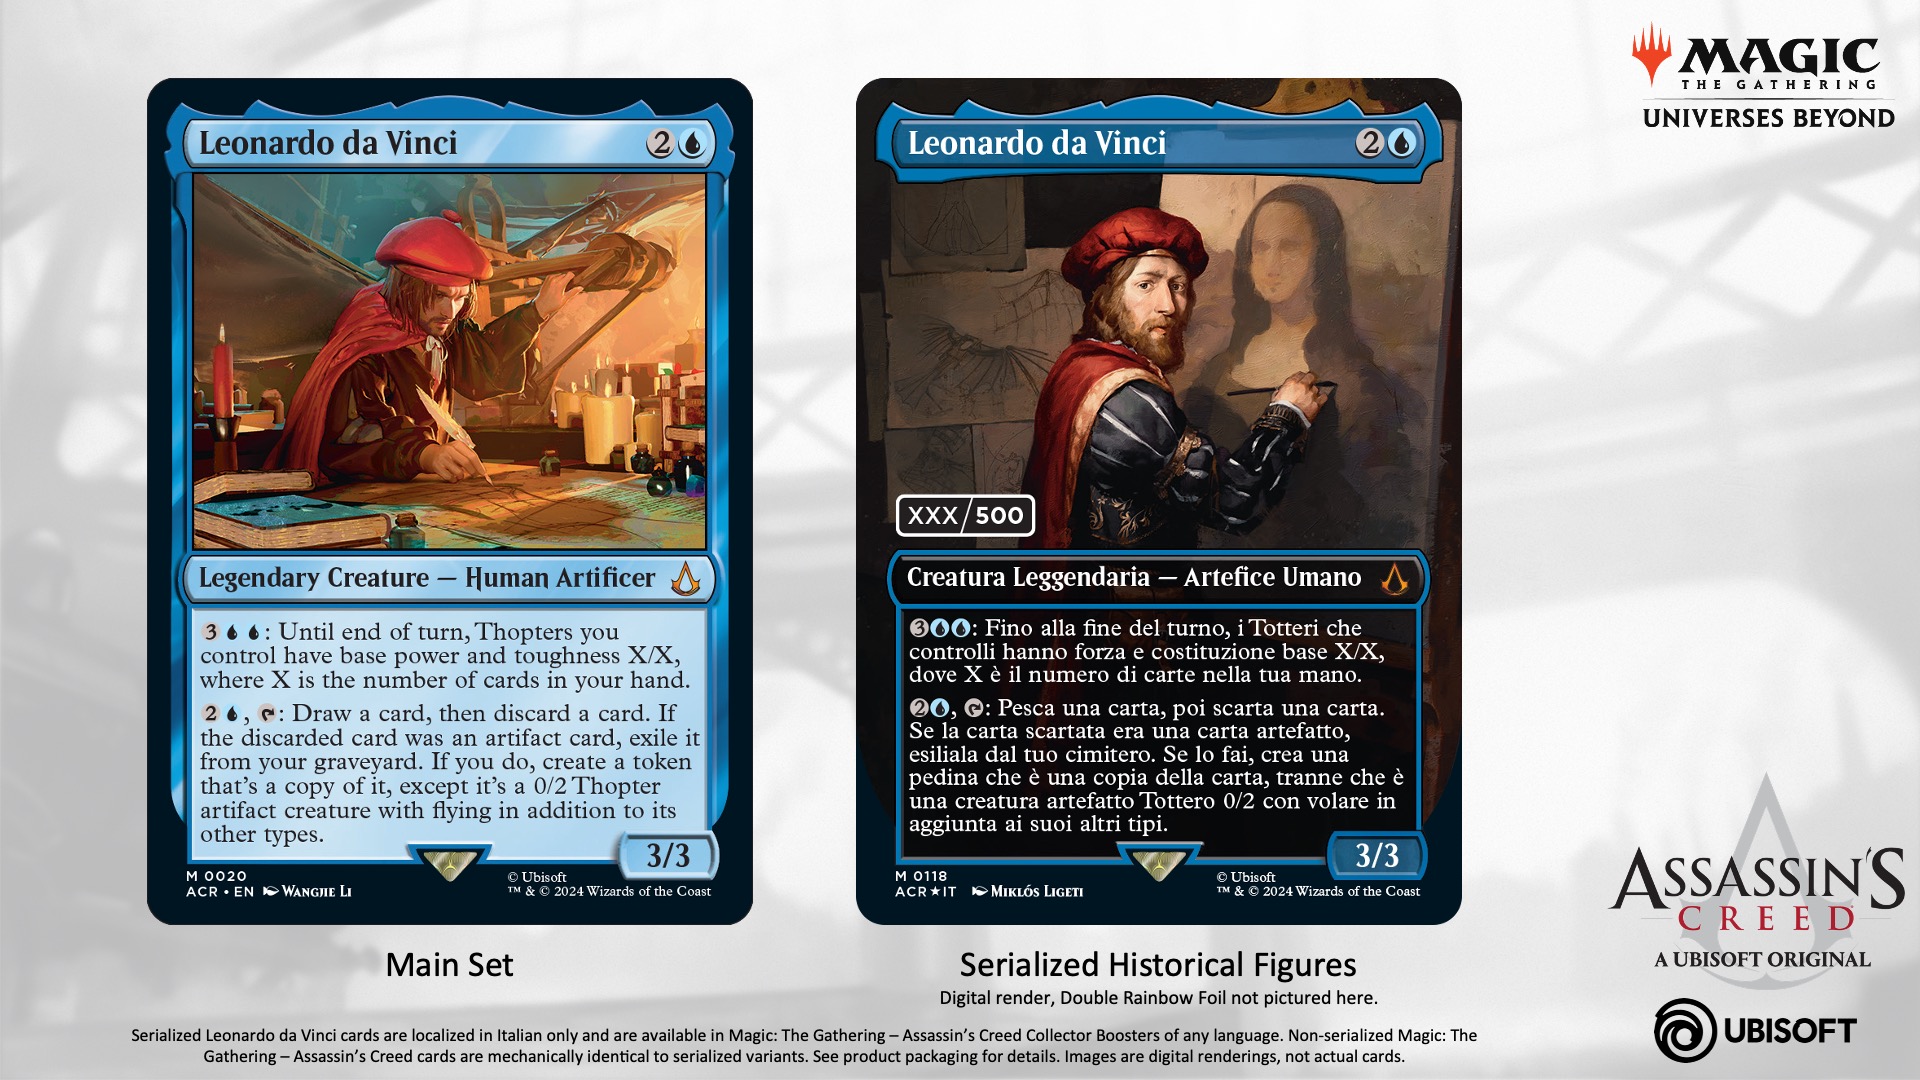 Leonardo da Vinci cards as part of the Assassin's Creed and Magic: The Gathering collaboration